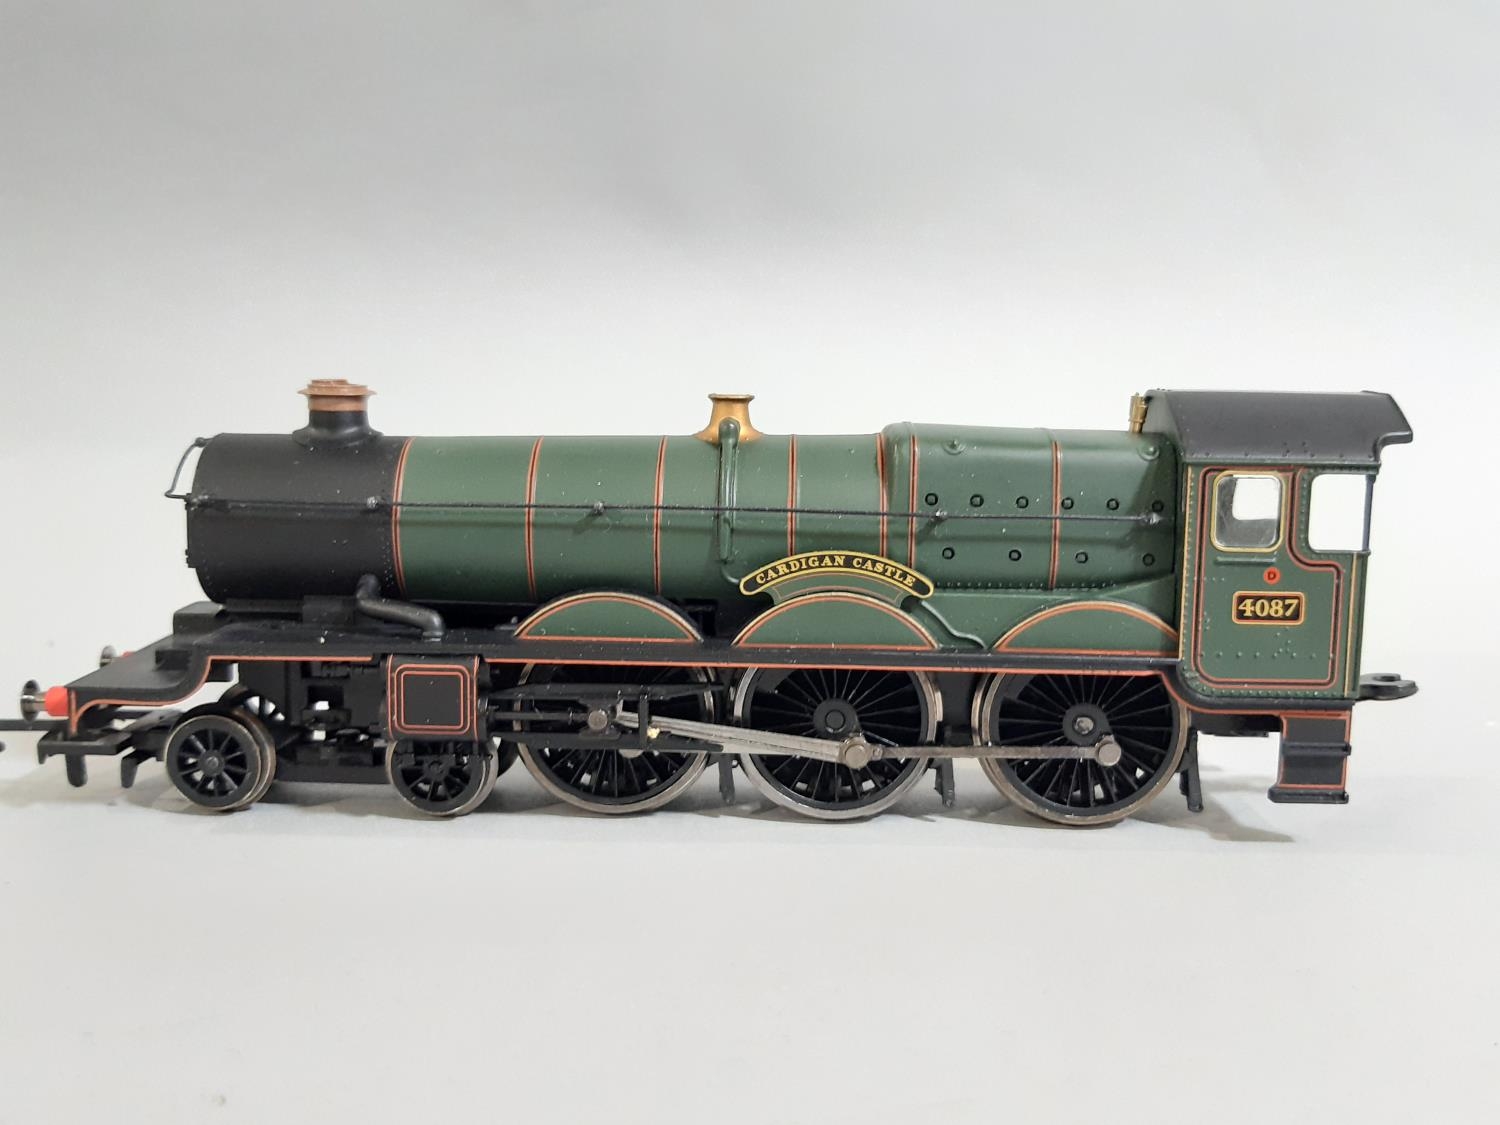 Hornby railway 00 gauge box set 'The Cornish Riviera' R1102, includes 4-6-0 Cardiff Castle - Image 3 of 6